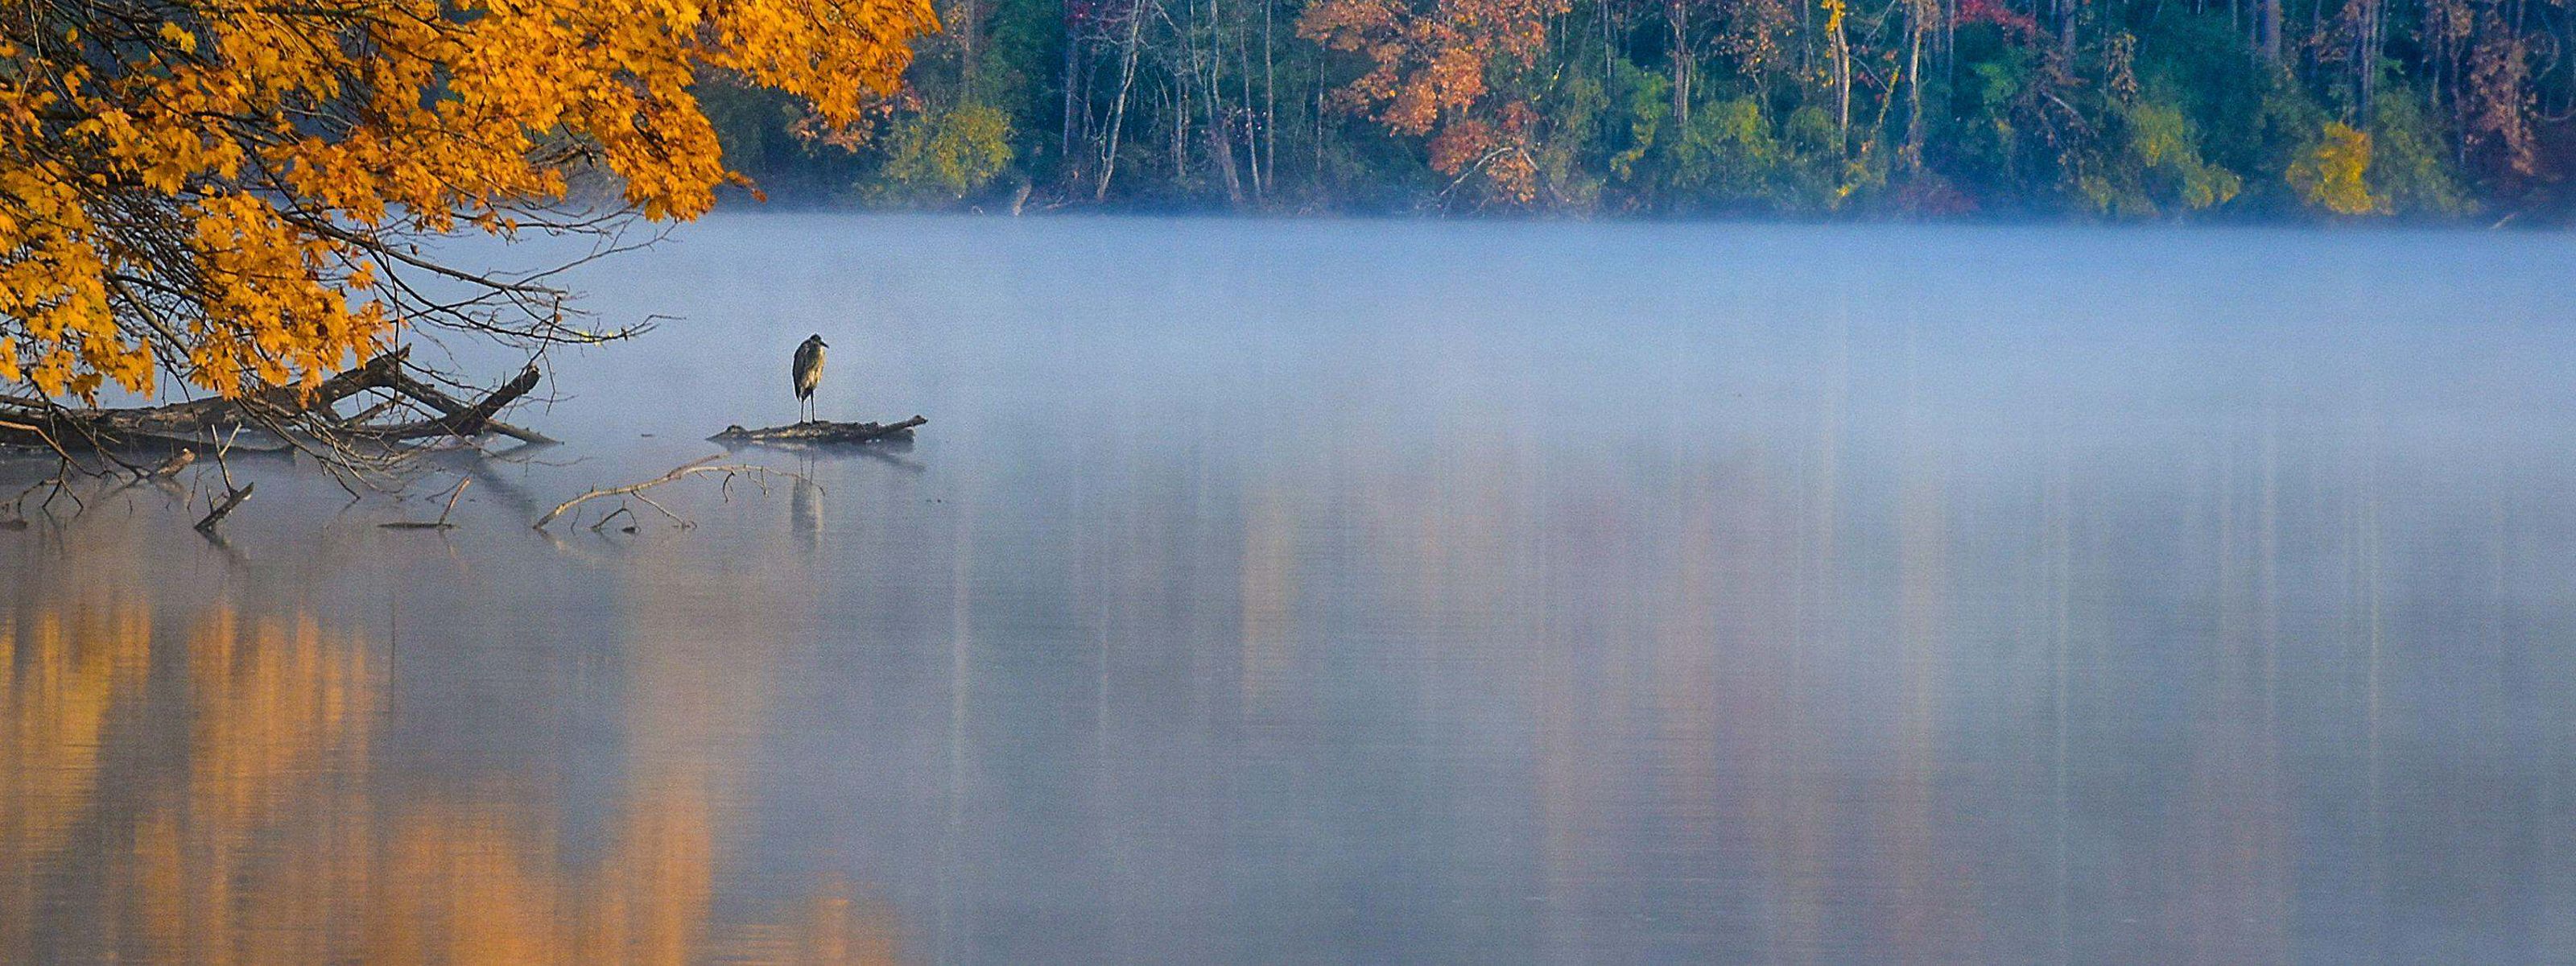 A view of a misty lake surrounded by fall colored trees.